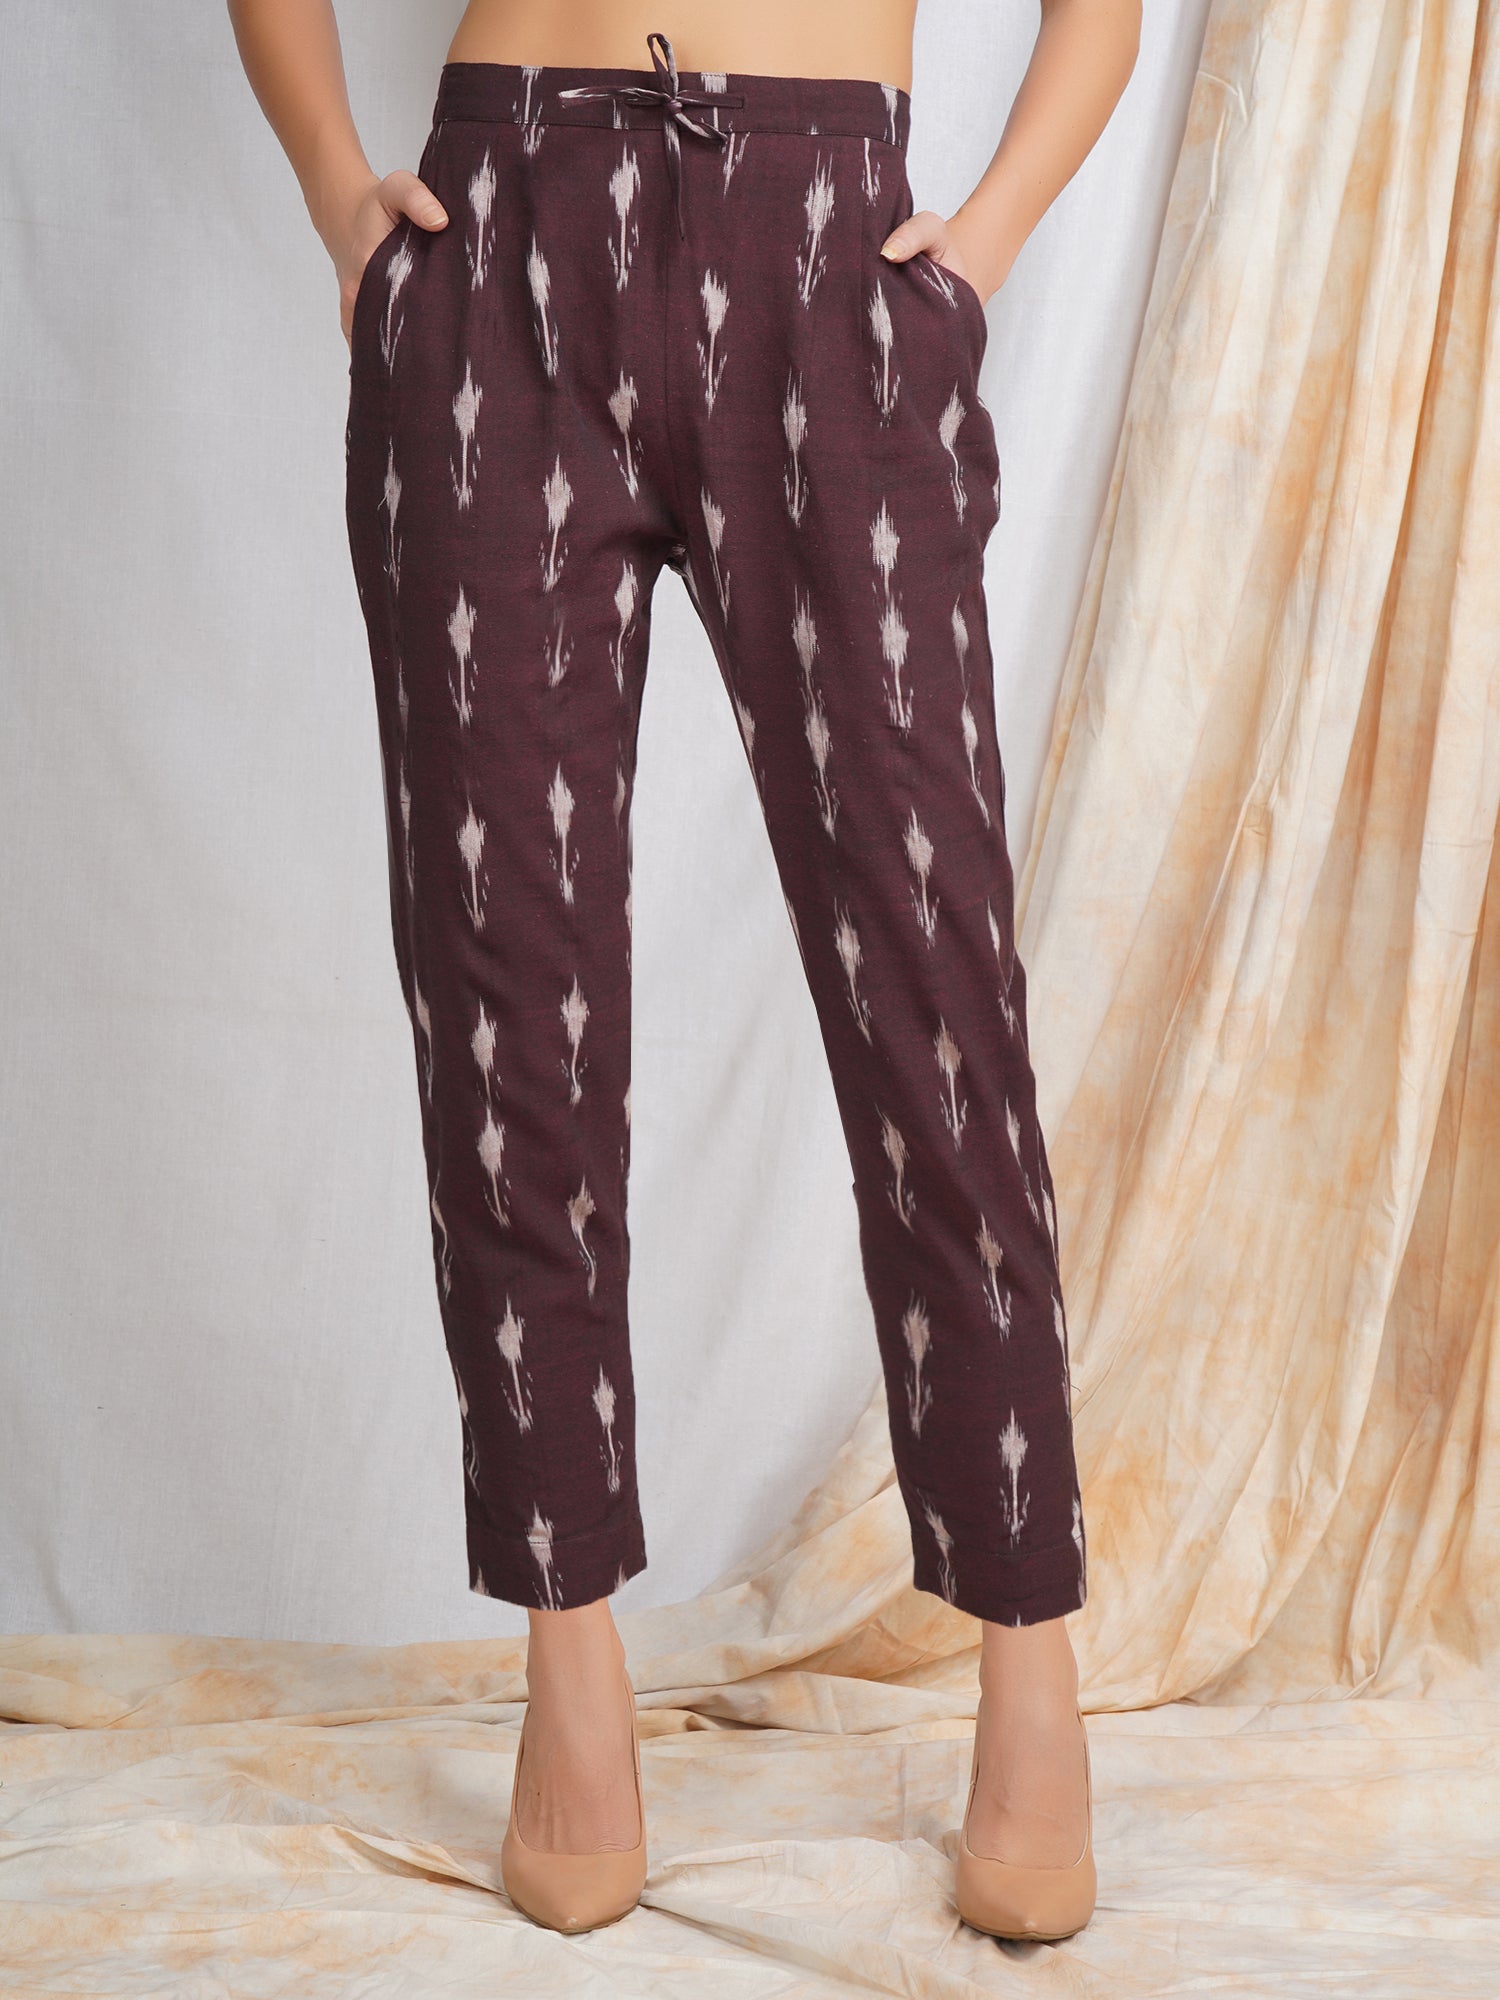 Ikat Cotton Pants in Maroon Color